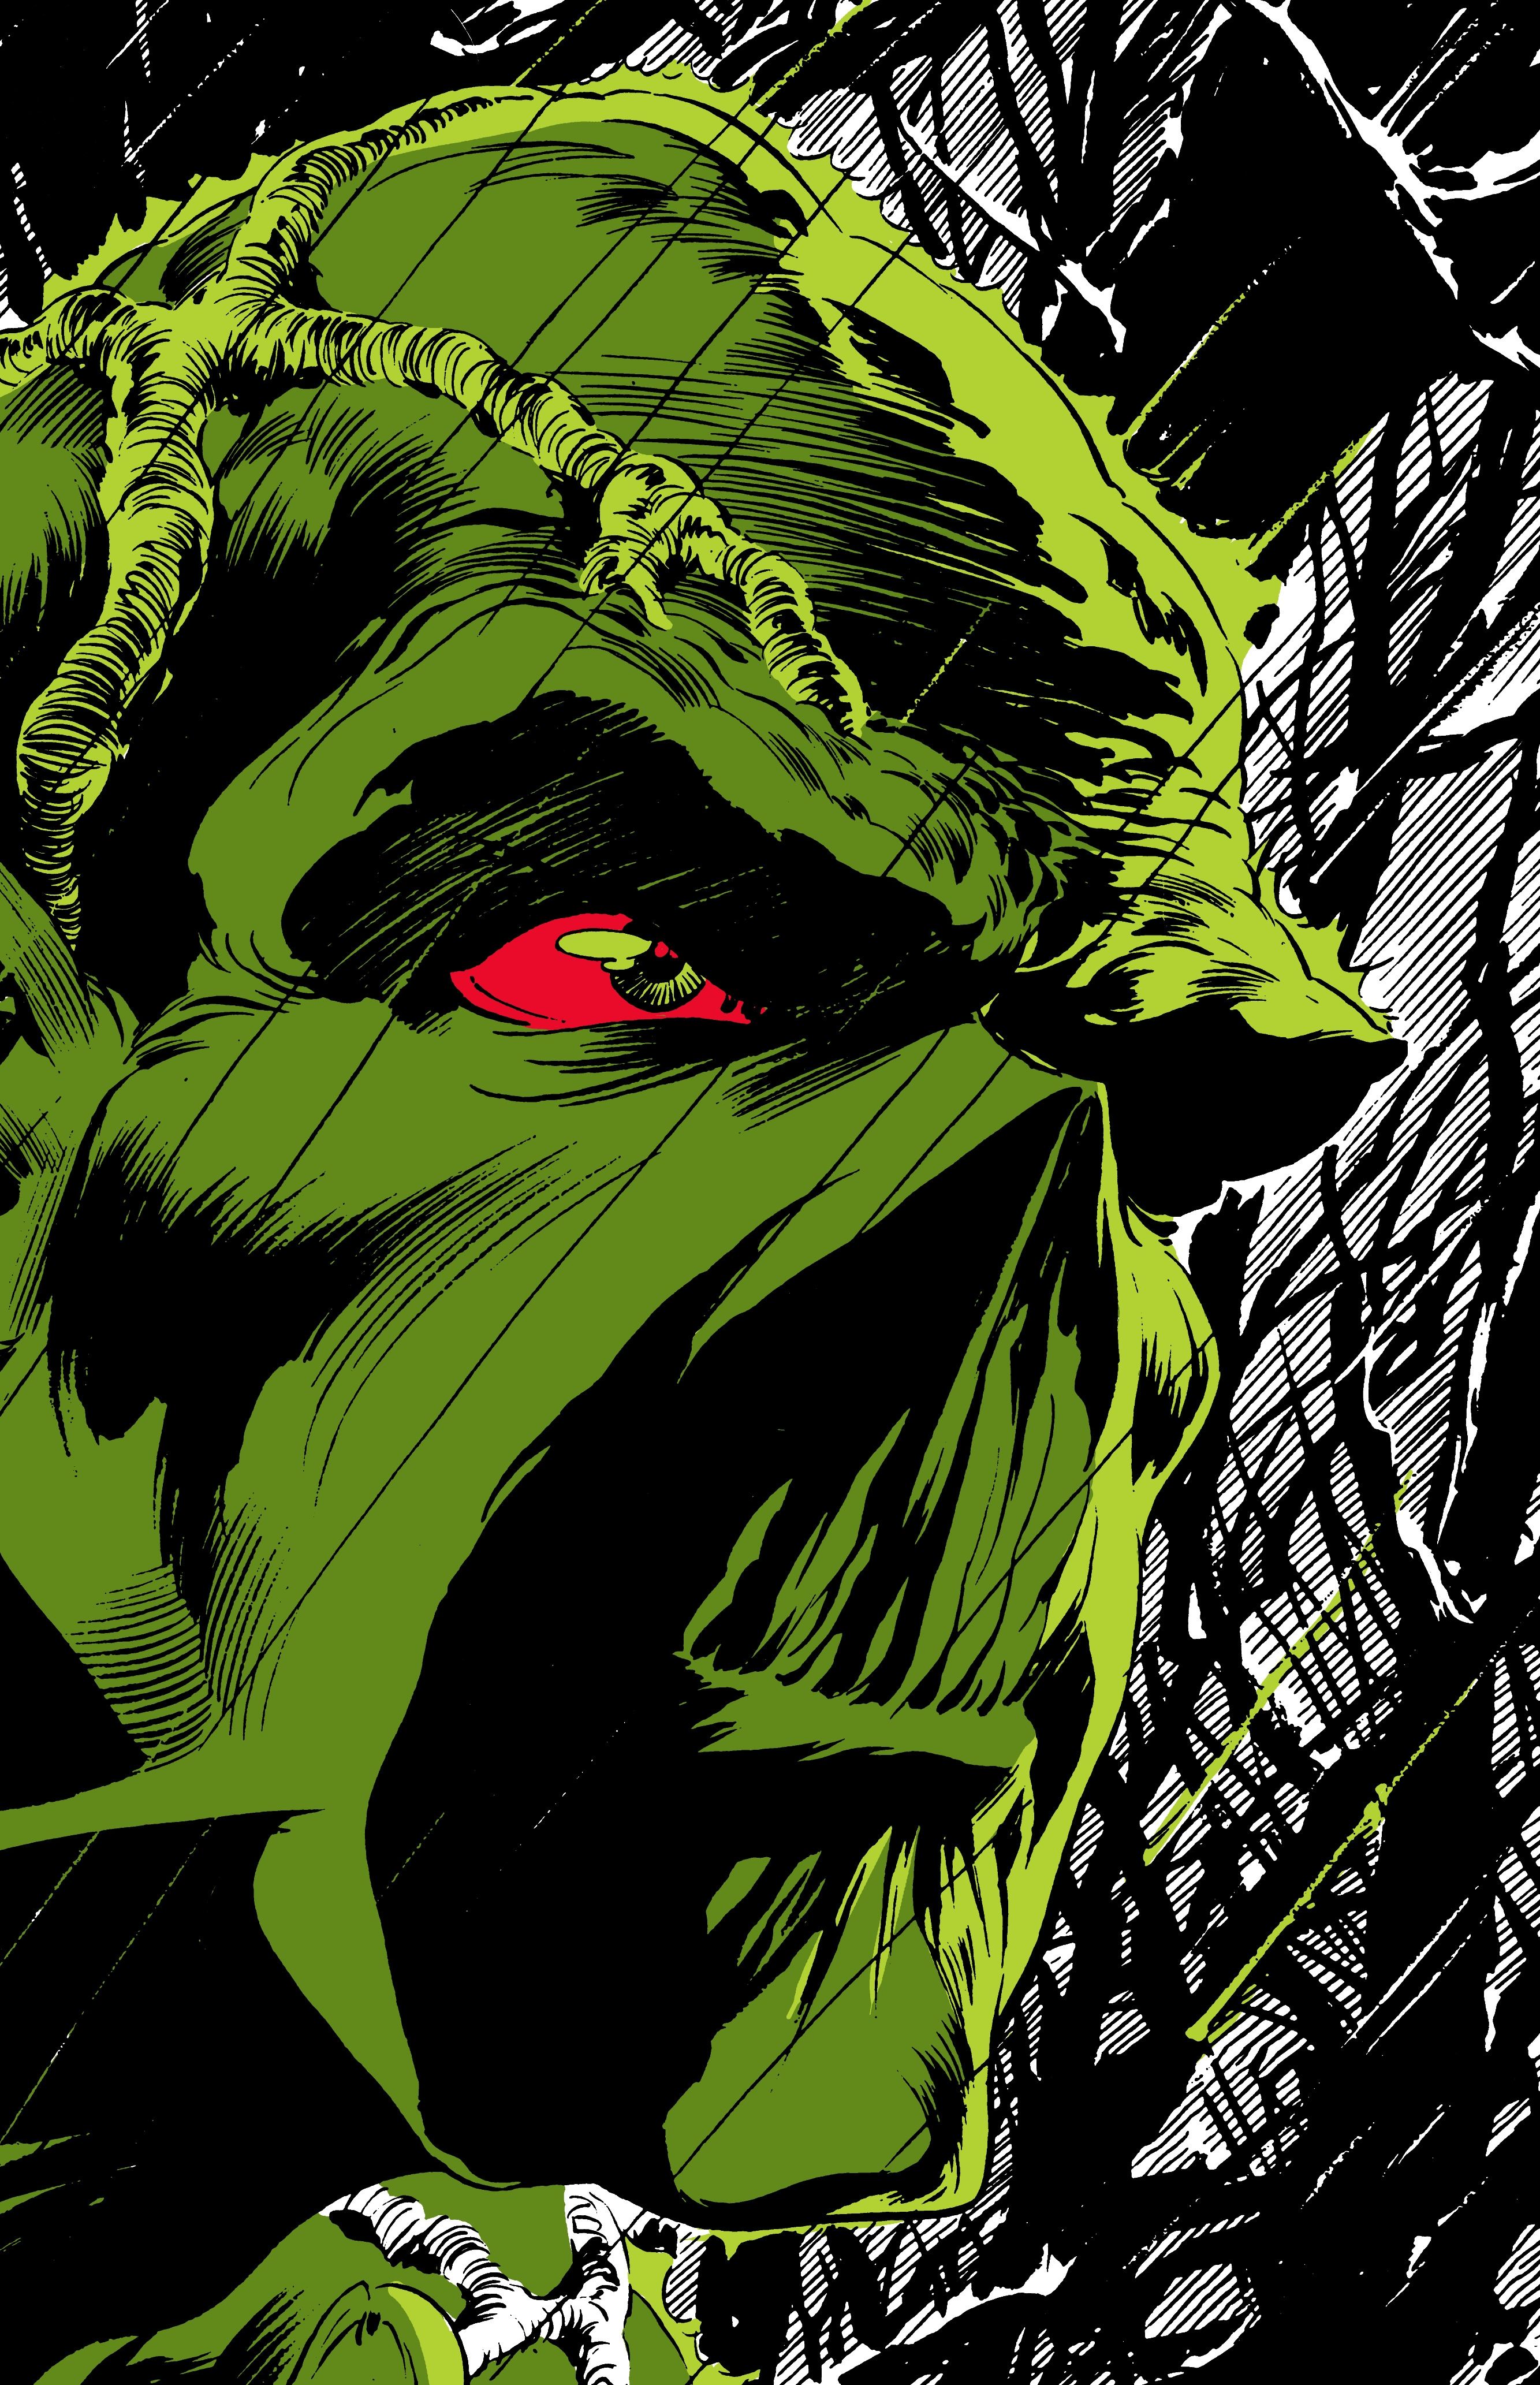 Swamp Thing in a DC Comic Book